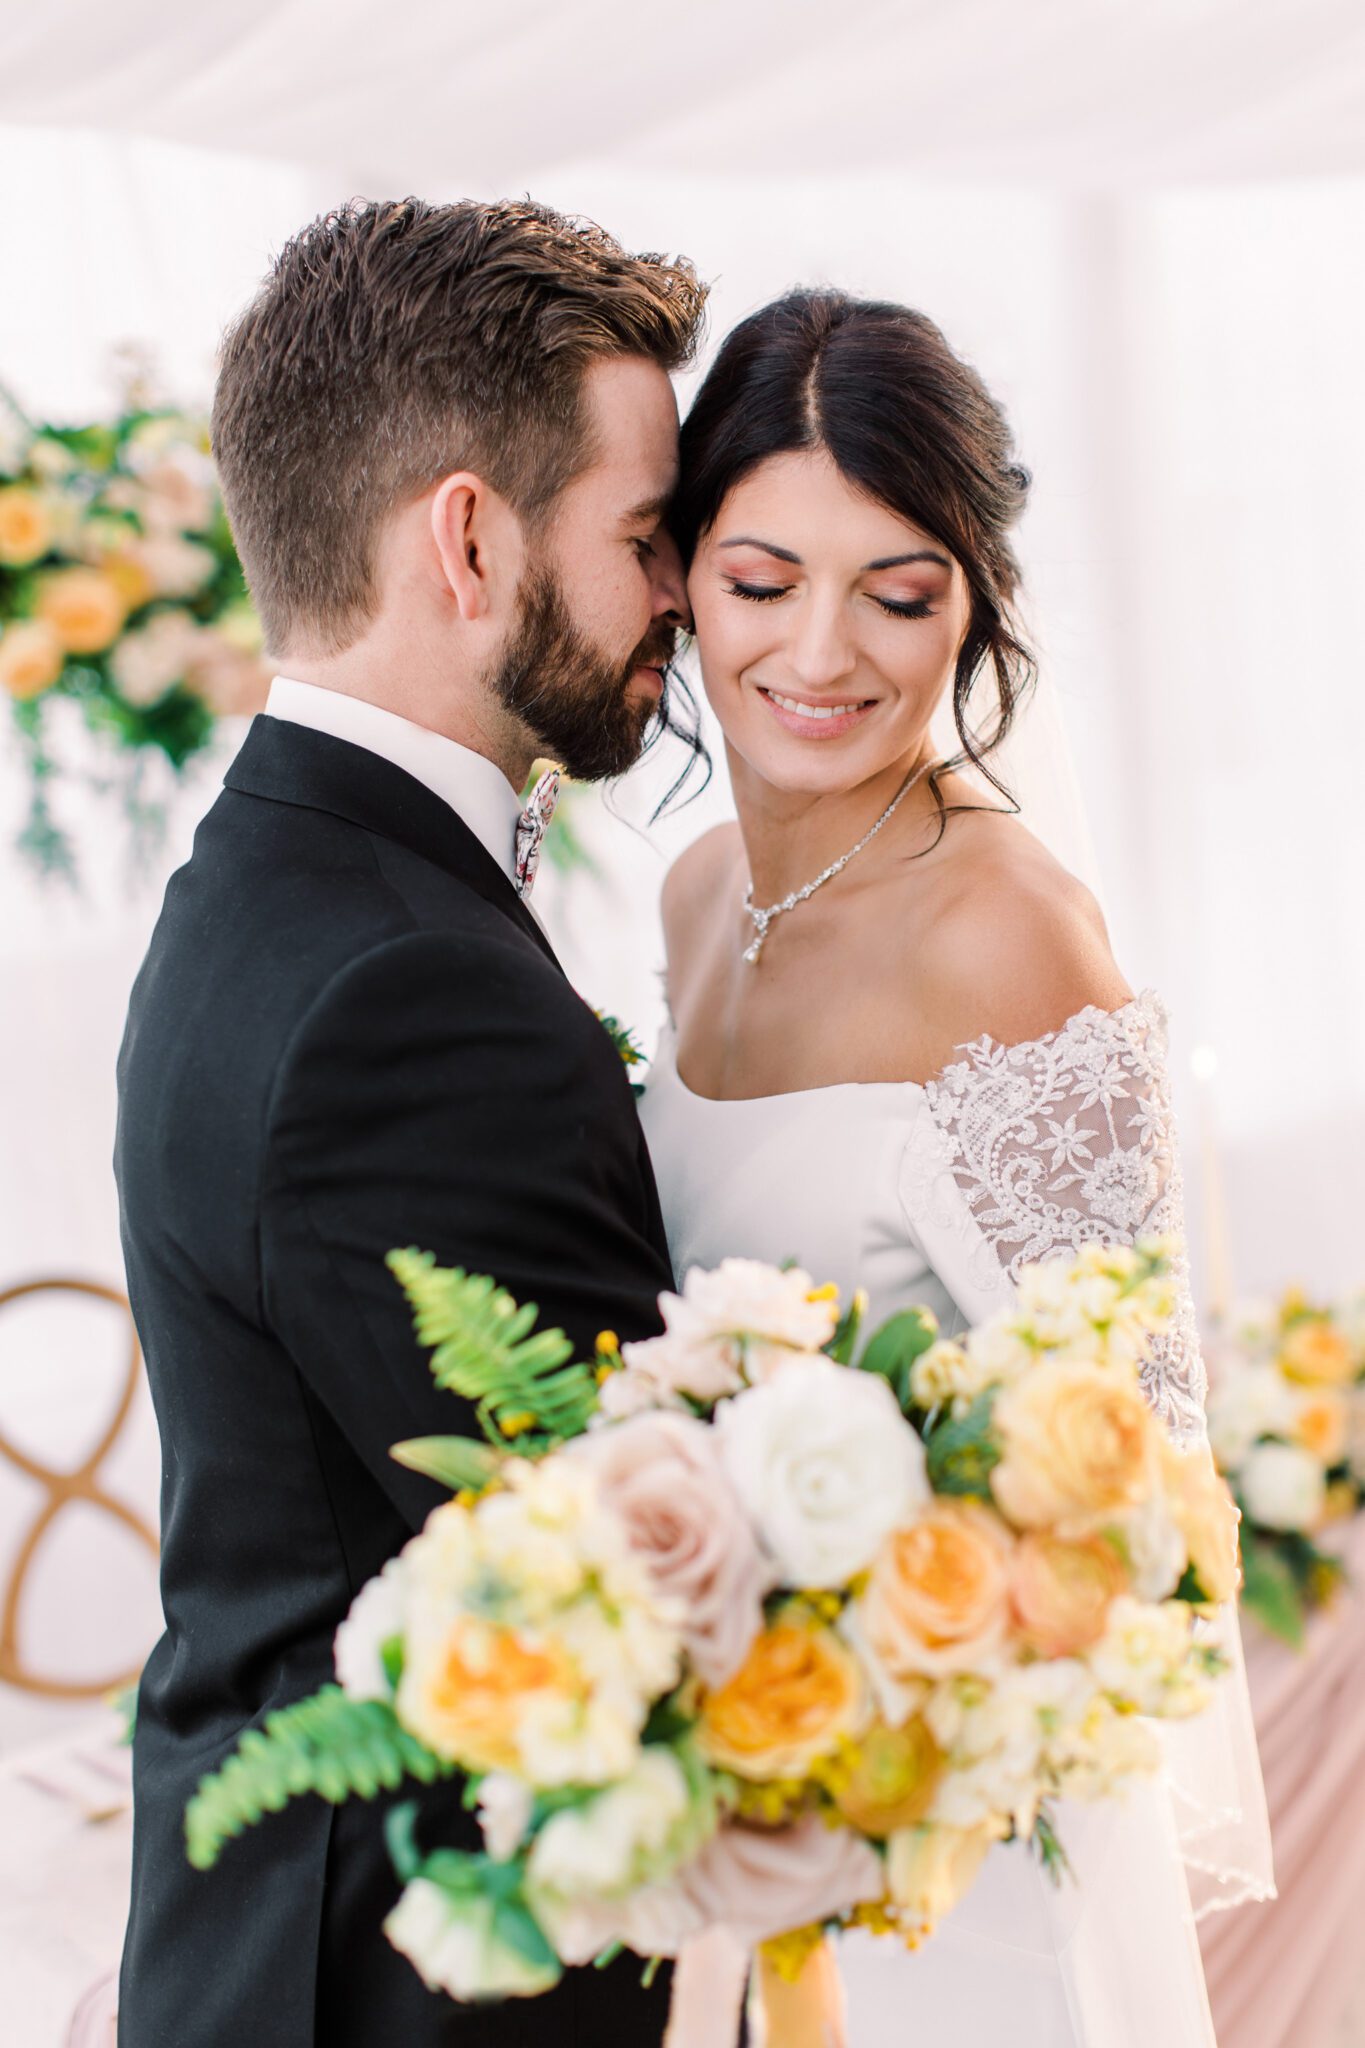 Bride and groom embracing at stunning tented wedding at Sunflower & Swallow, bride holding yellow and peach bridal bouquet, summer wedding inspiration